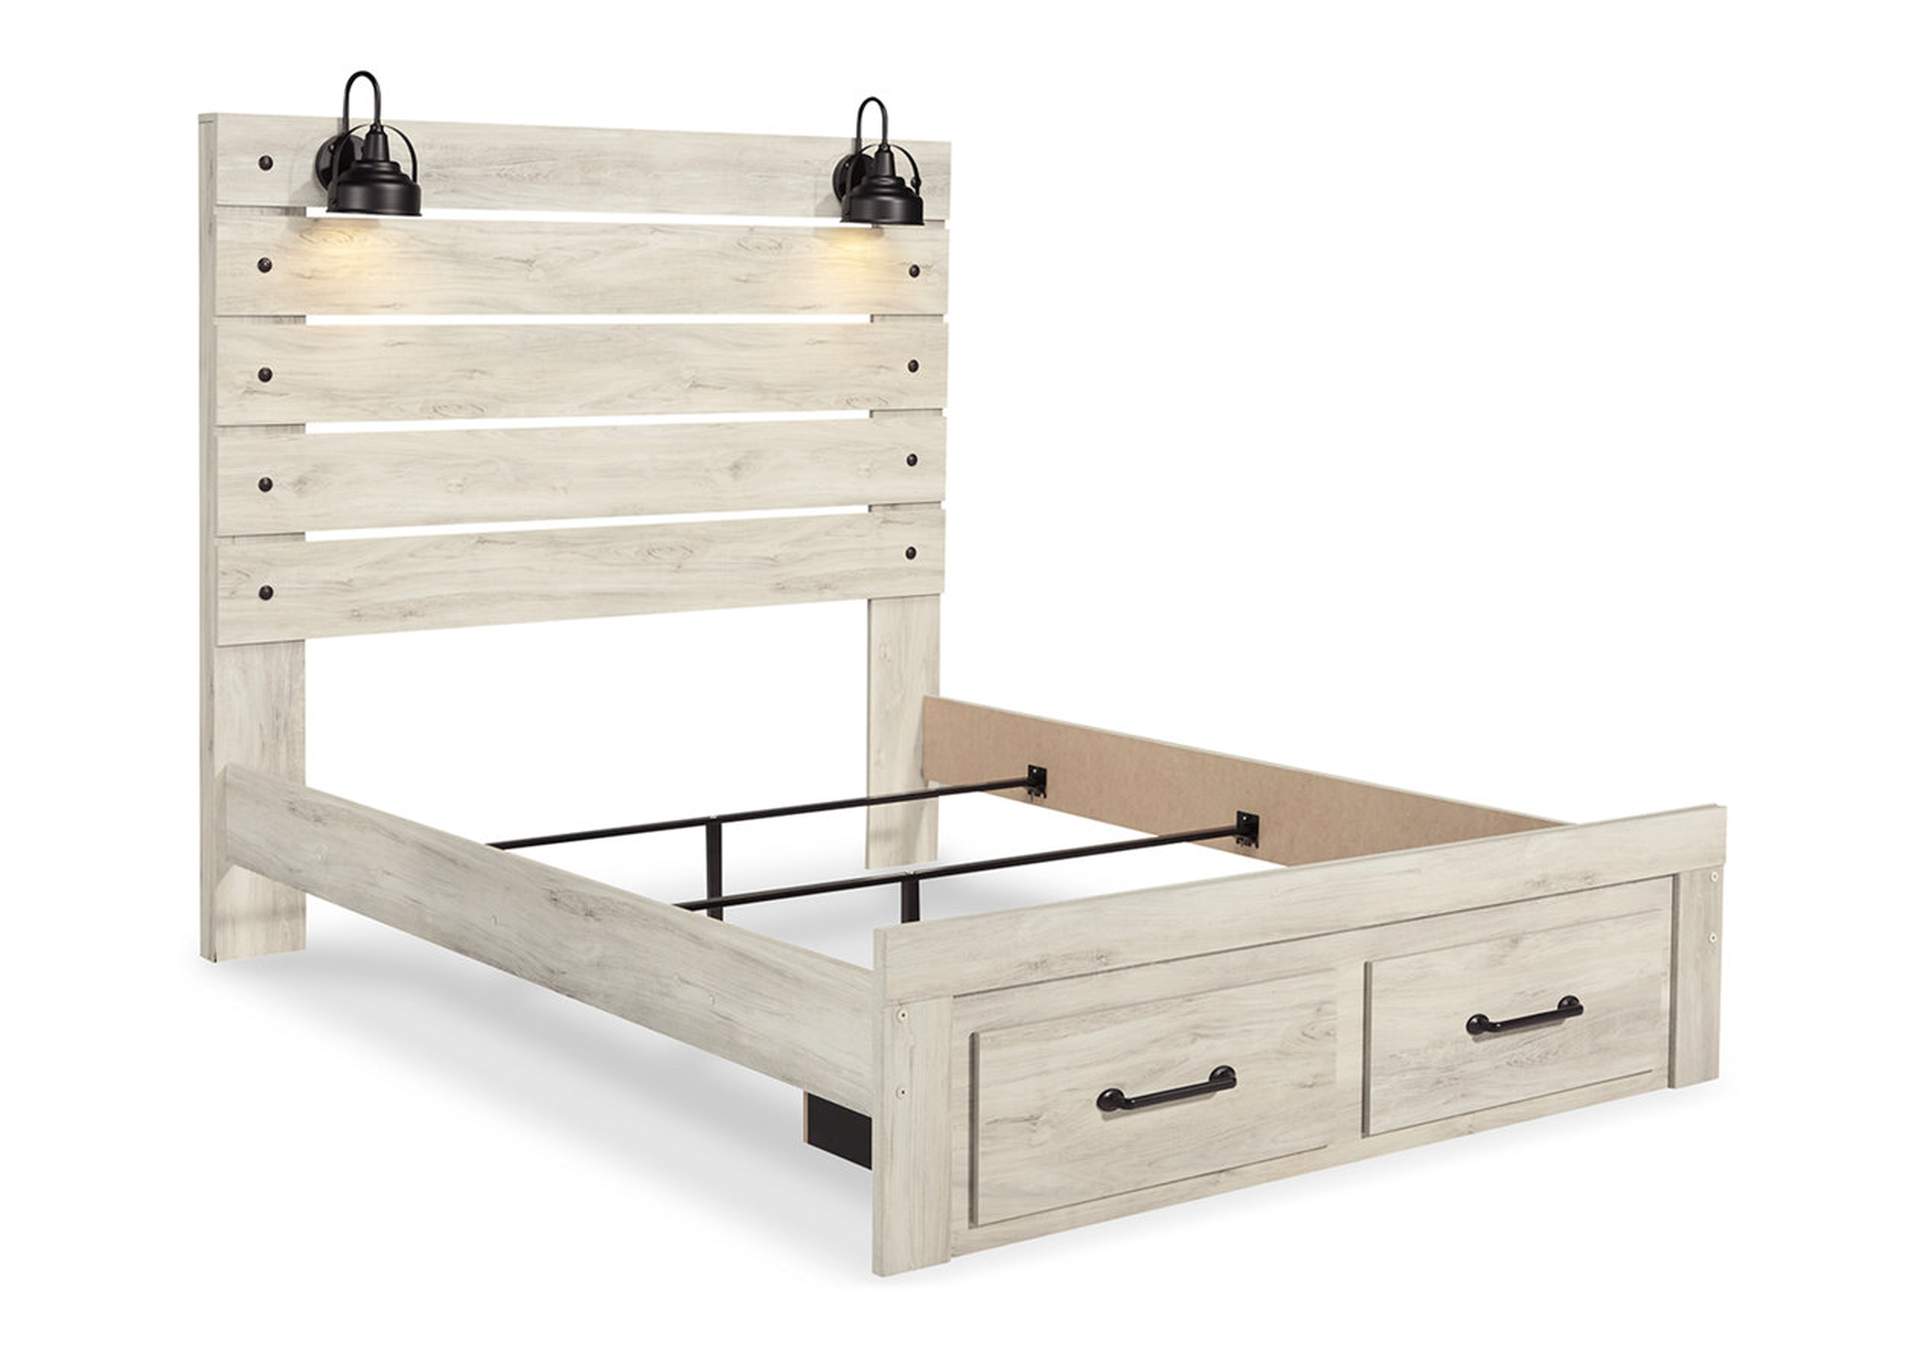 Cambeck Queen Panel Bed with 2 Storage Drawers,Signature Design By Ashley